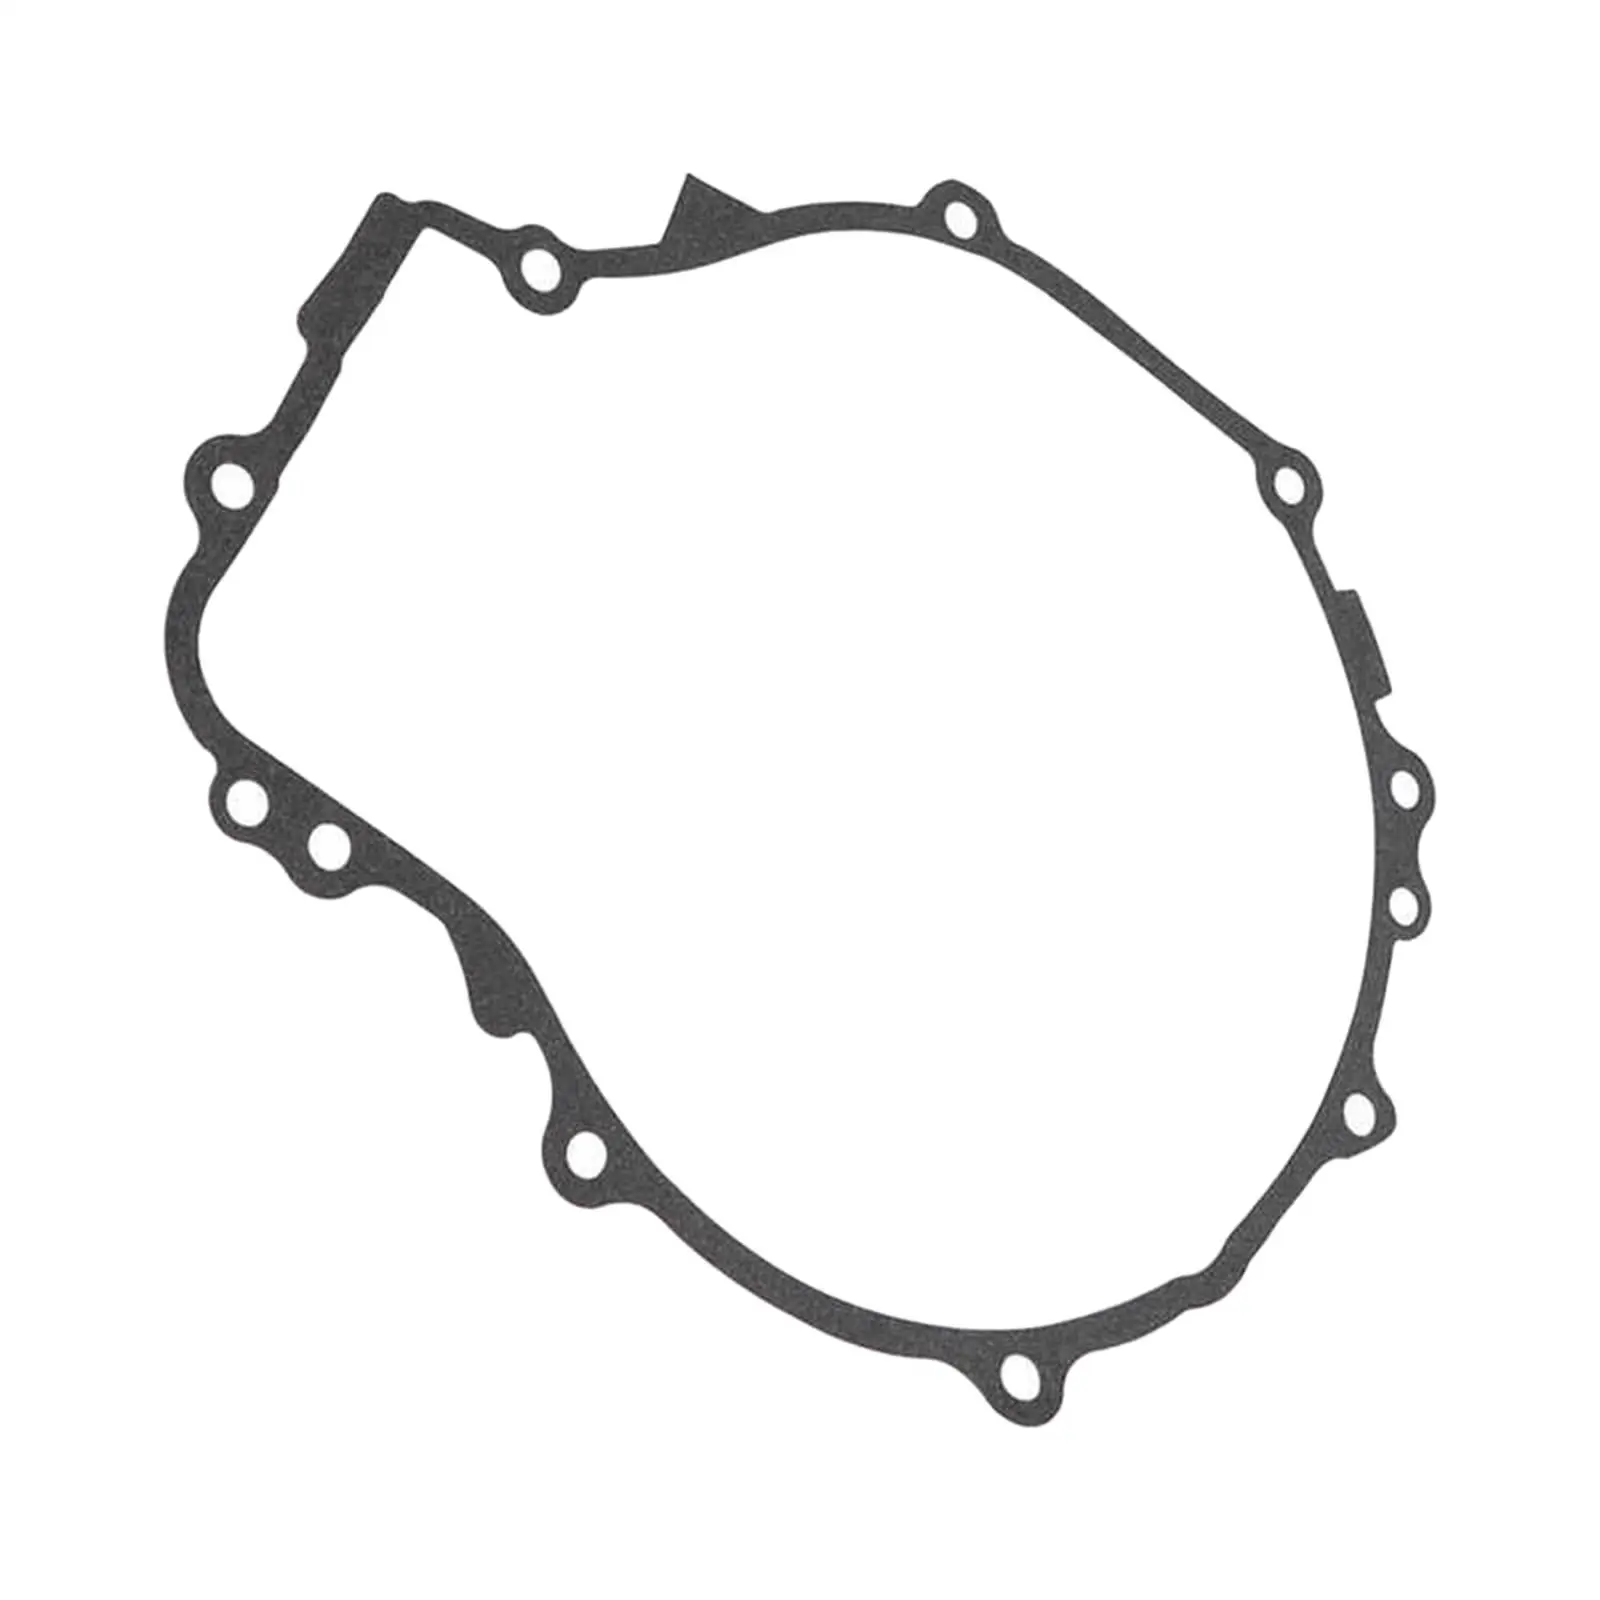 Car Pull Start Gasket 3084933 for Polaris Sportsman 500 1996?2011 Replace High Quality